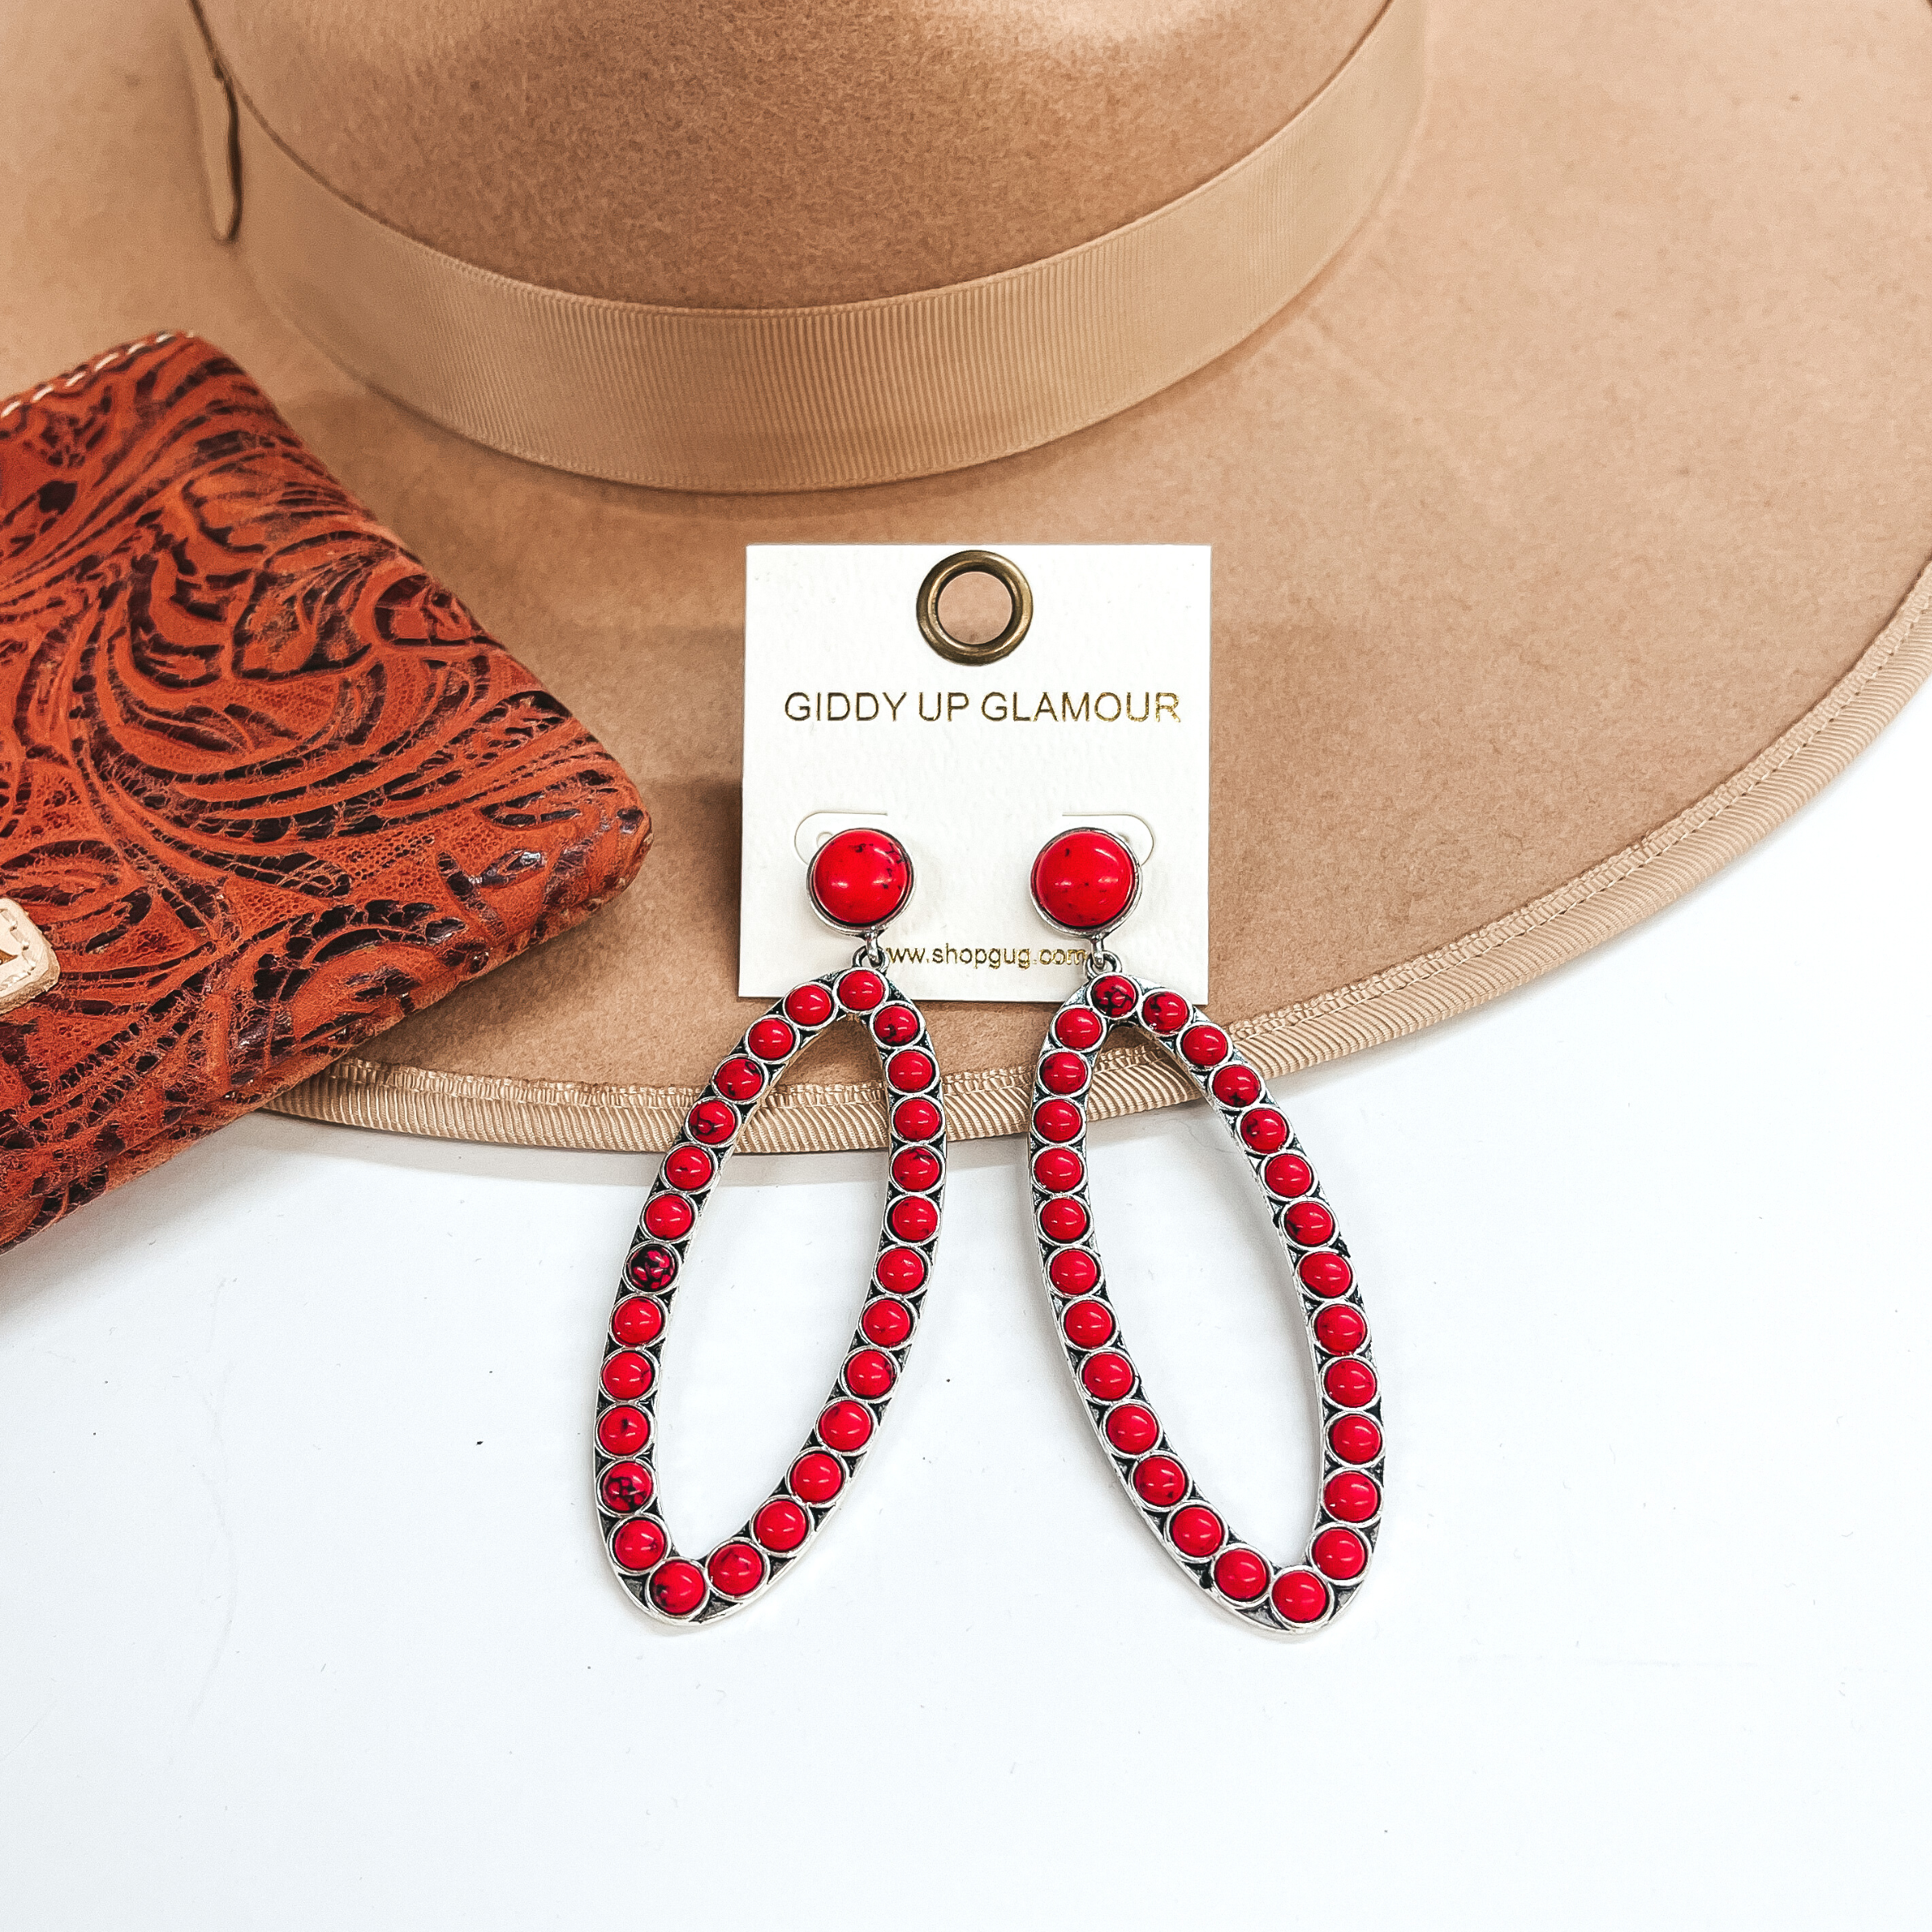 These are open oval drop earrings with red stones.  Post back earrings with a small stone and an open  oval drop with red stones all around. These are  taken on a light brown hat brim and white background.  There is a leather printed wallet in the side  as decor.